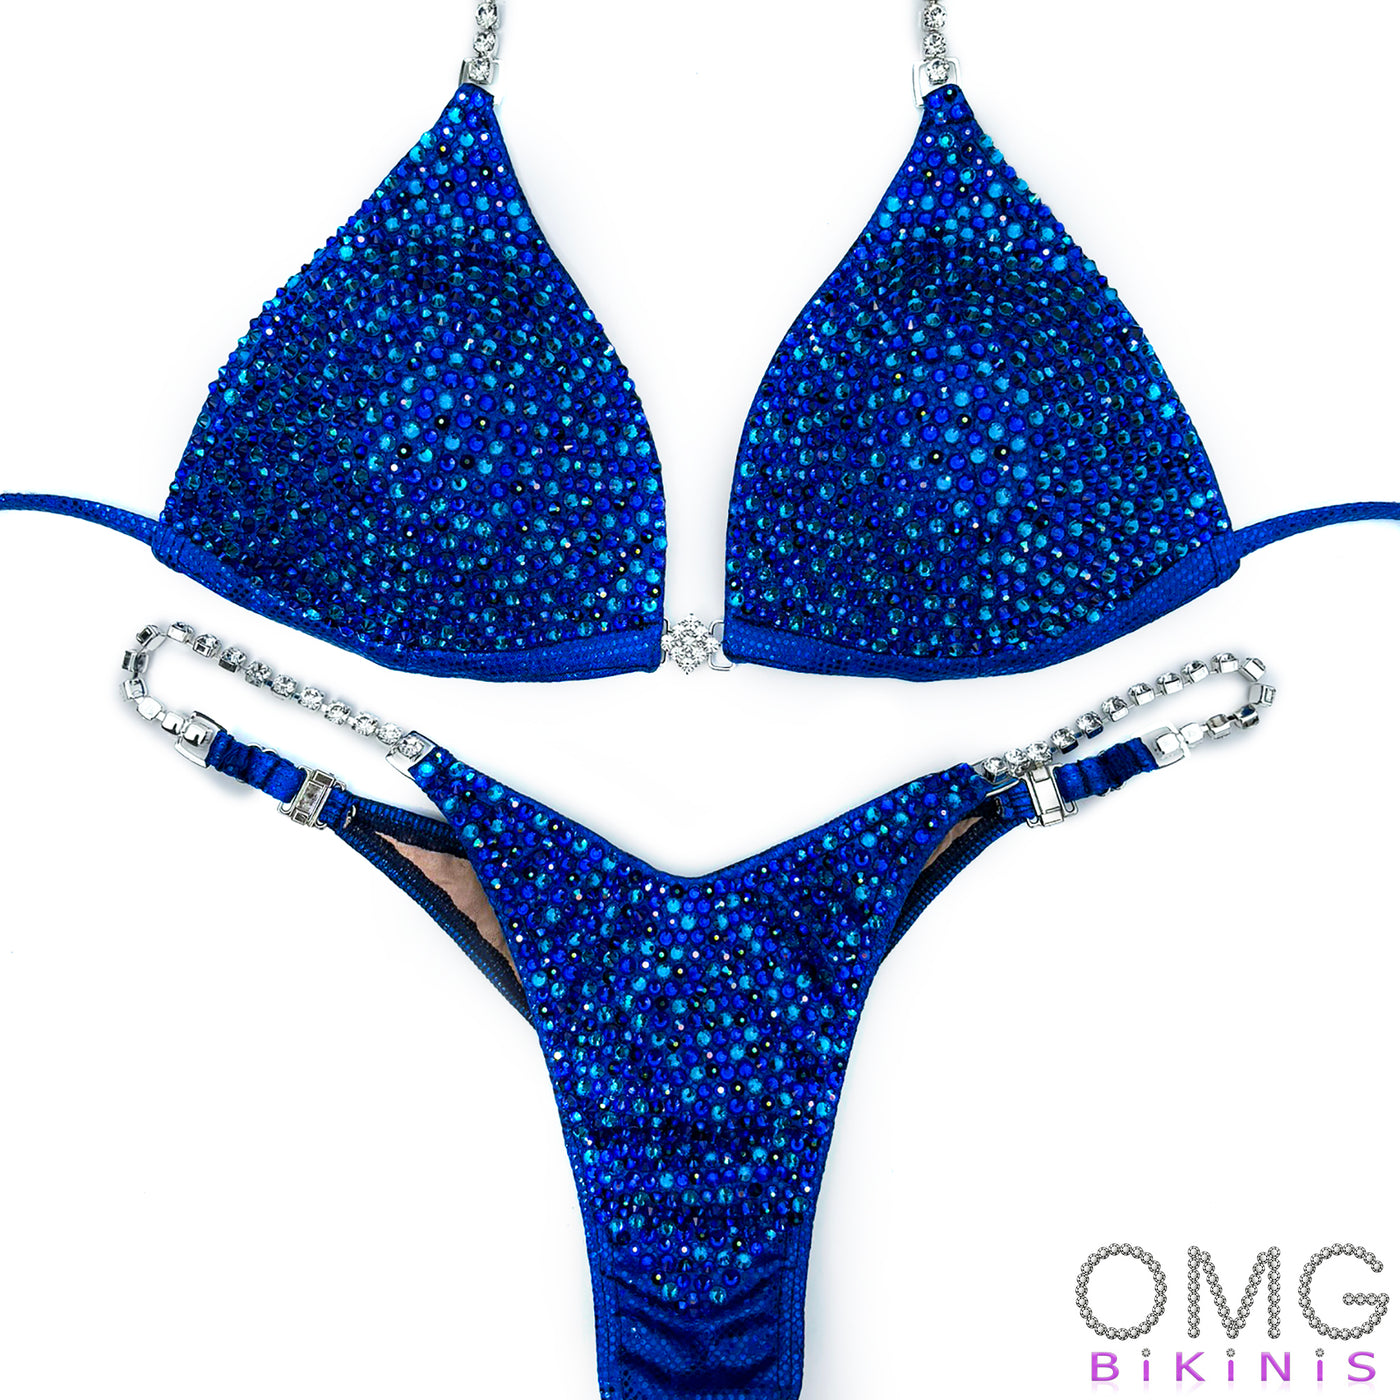 Star Sapphire Competition Suit | OMG Bikinis